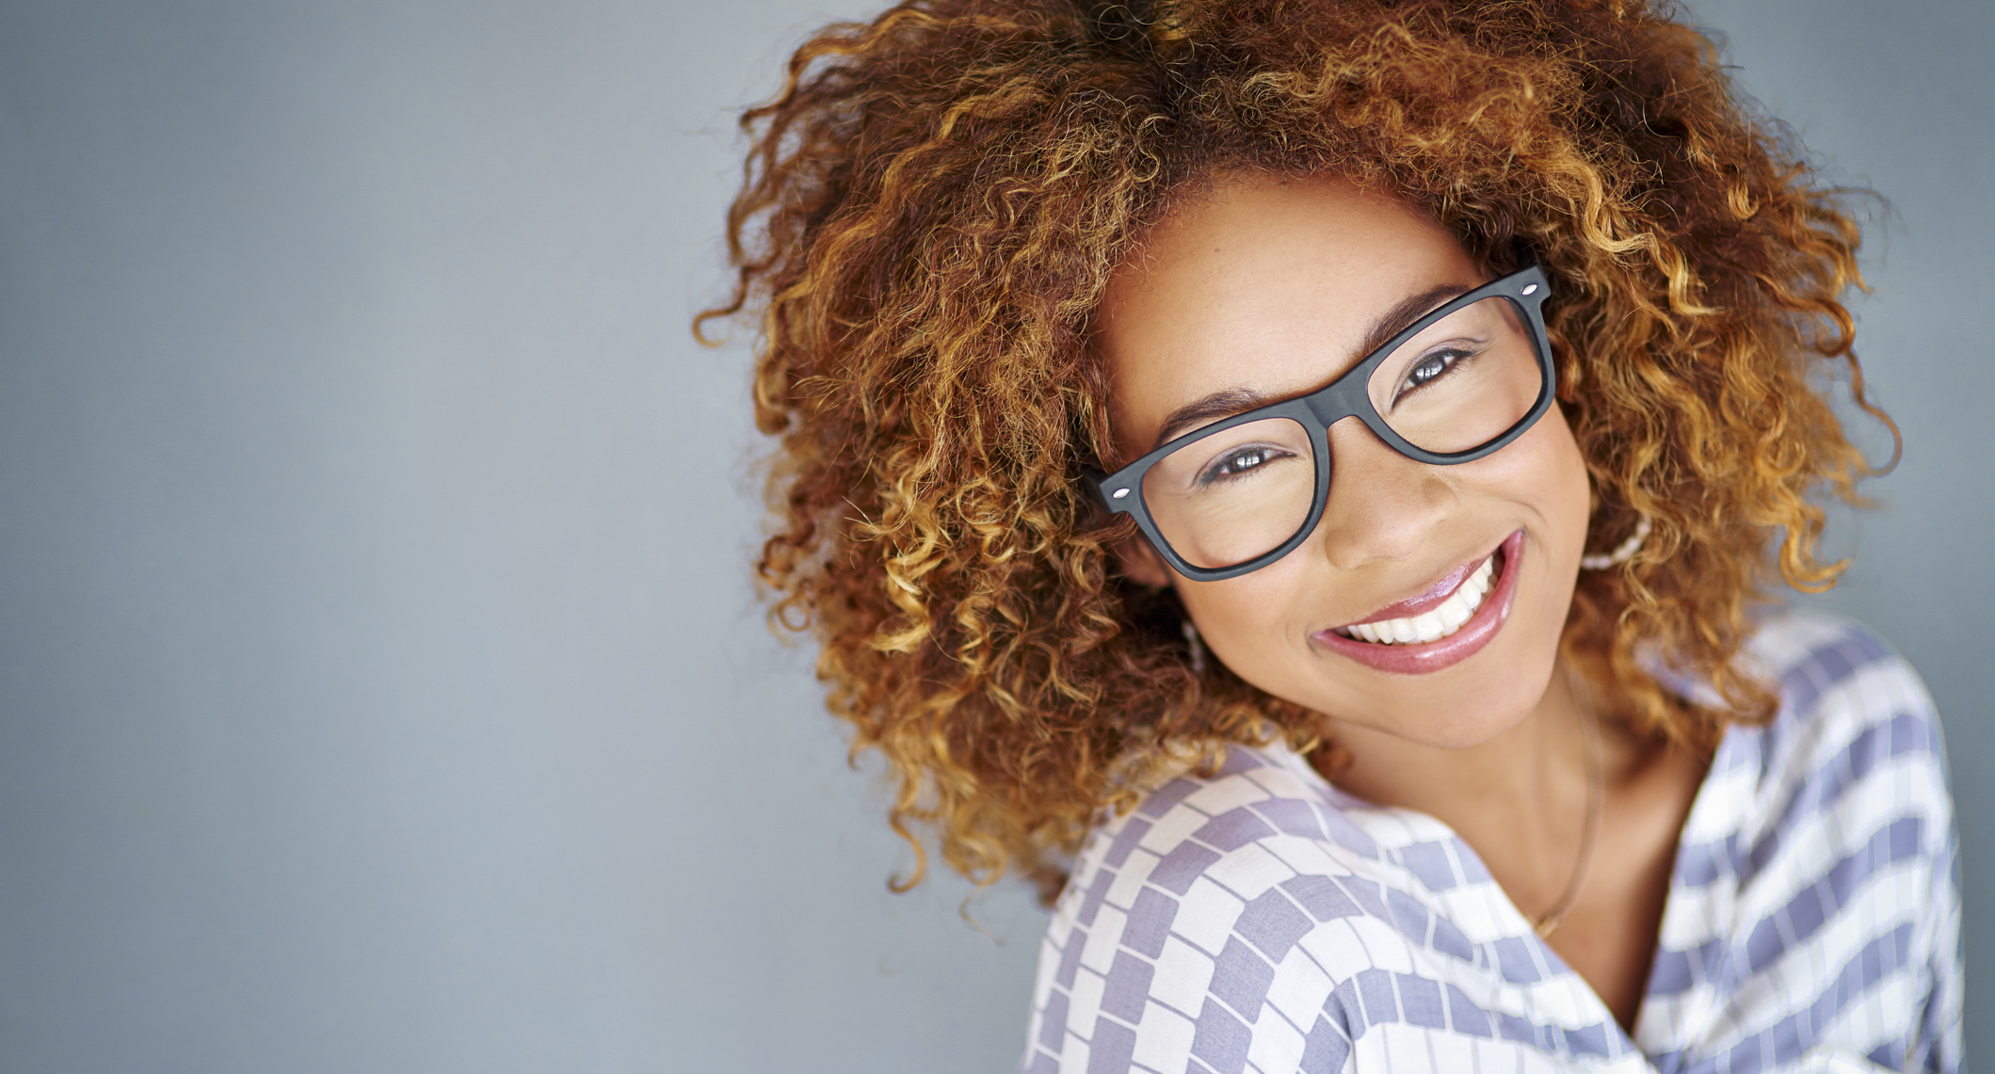 Building an eyeglasses wardrobe doesn't have to break the bank. Woman in stylish frames.